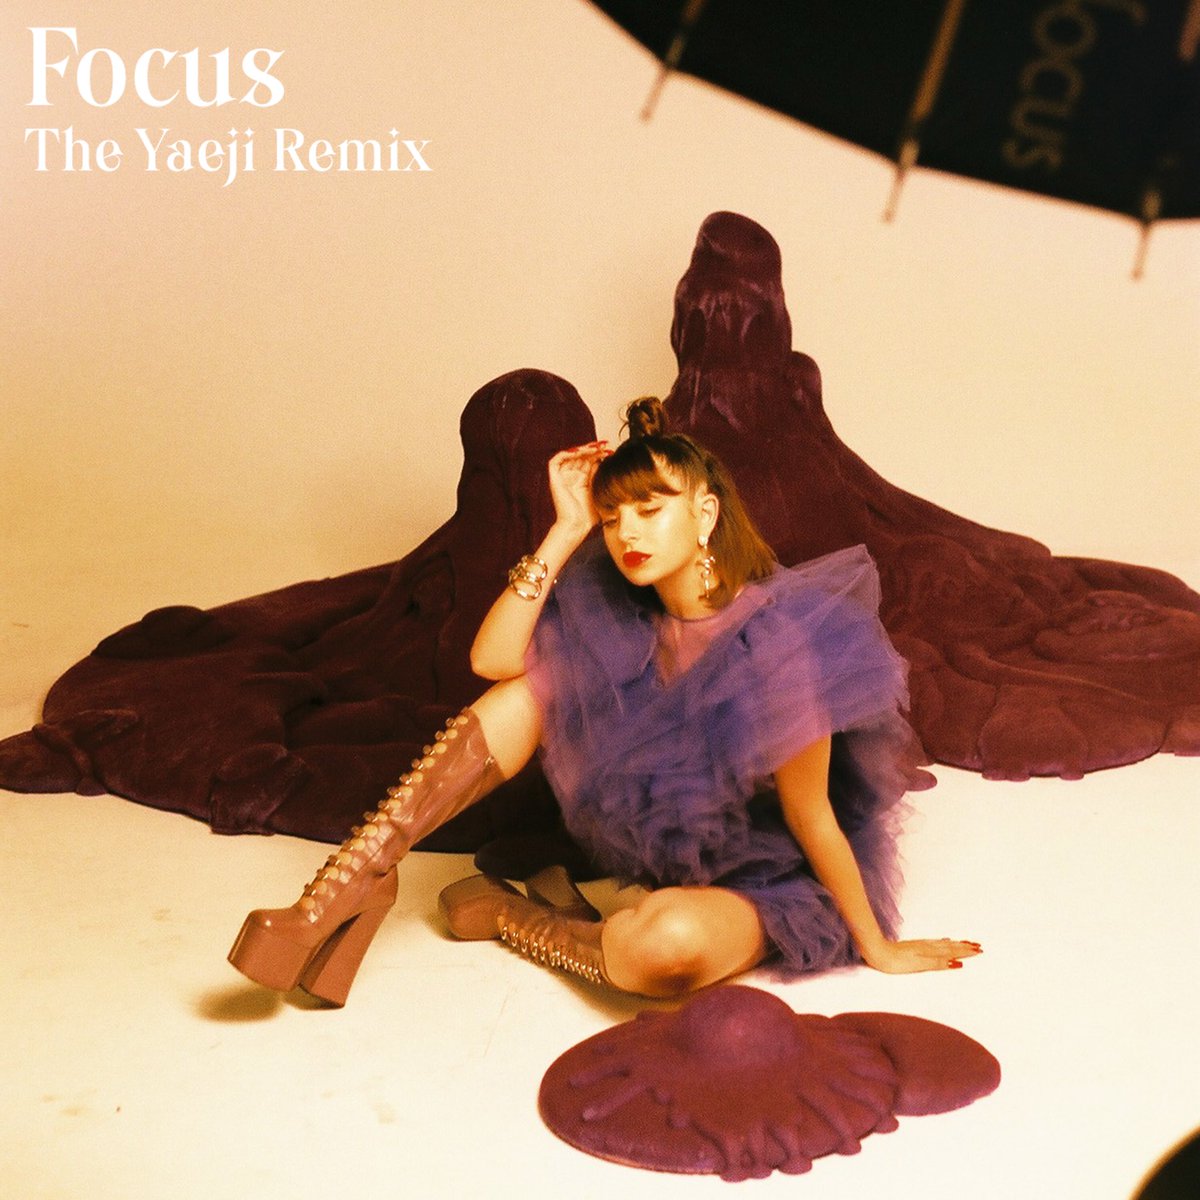 SURPRISE!!! @KRAEJI DID A REMIX OF FOCUS AND ITS A BOPPPPP! ENJOY ANGELS ???? https://t.co/ZMtVmWo2C6 https://t.co/qciCTiZsgt